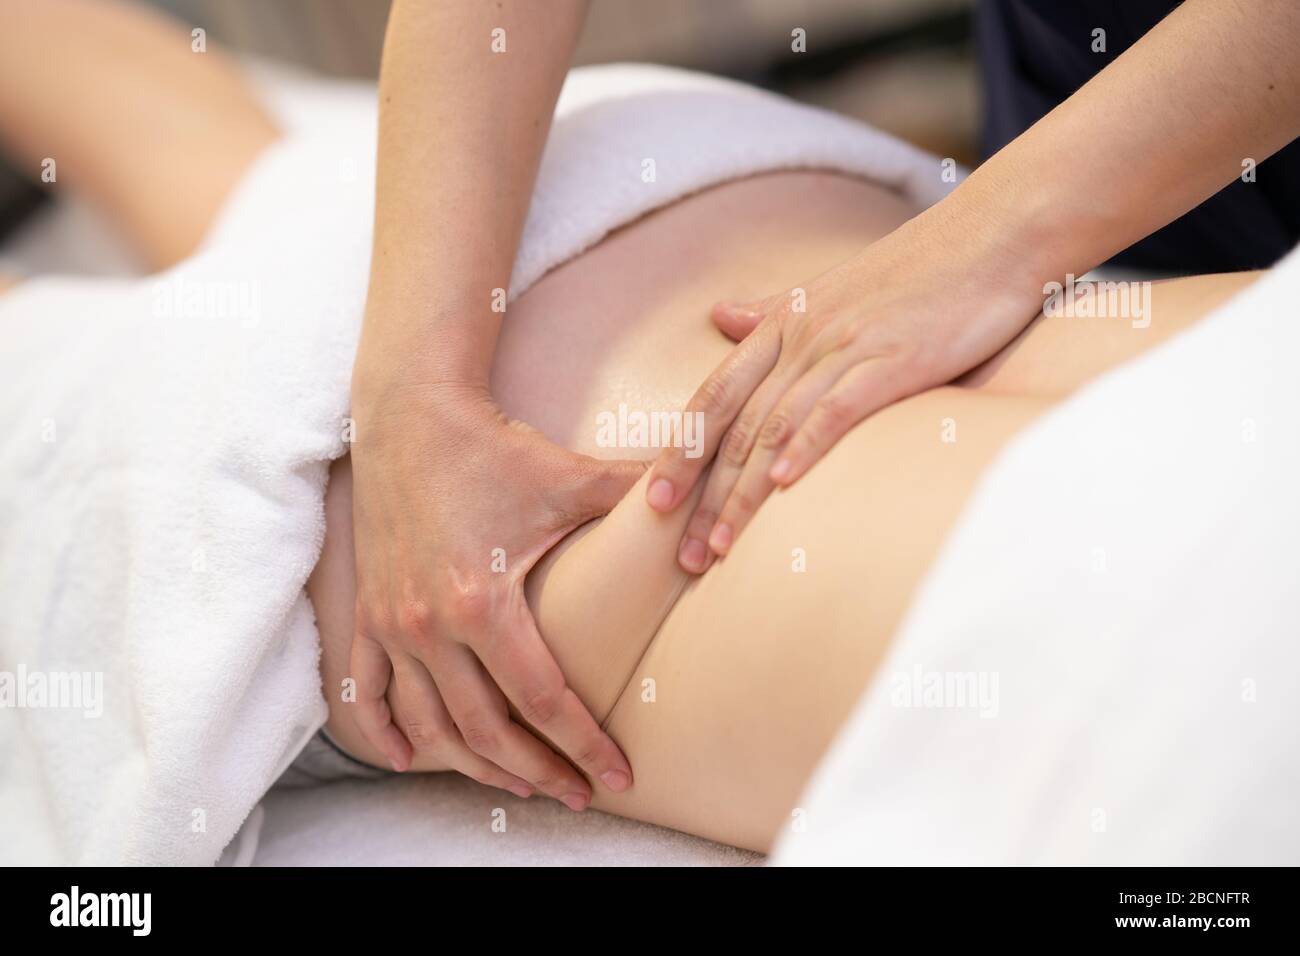 Young woman receiving a back massage in a physiotherapy center Stock Photo